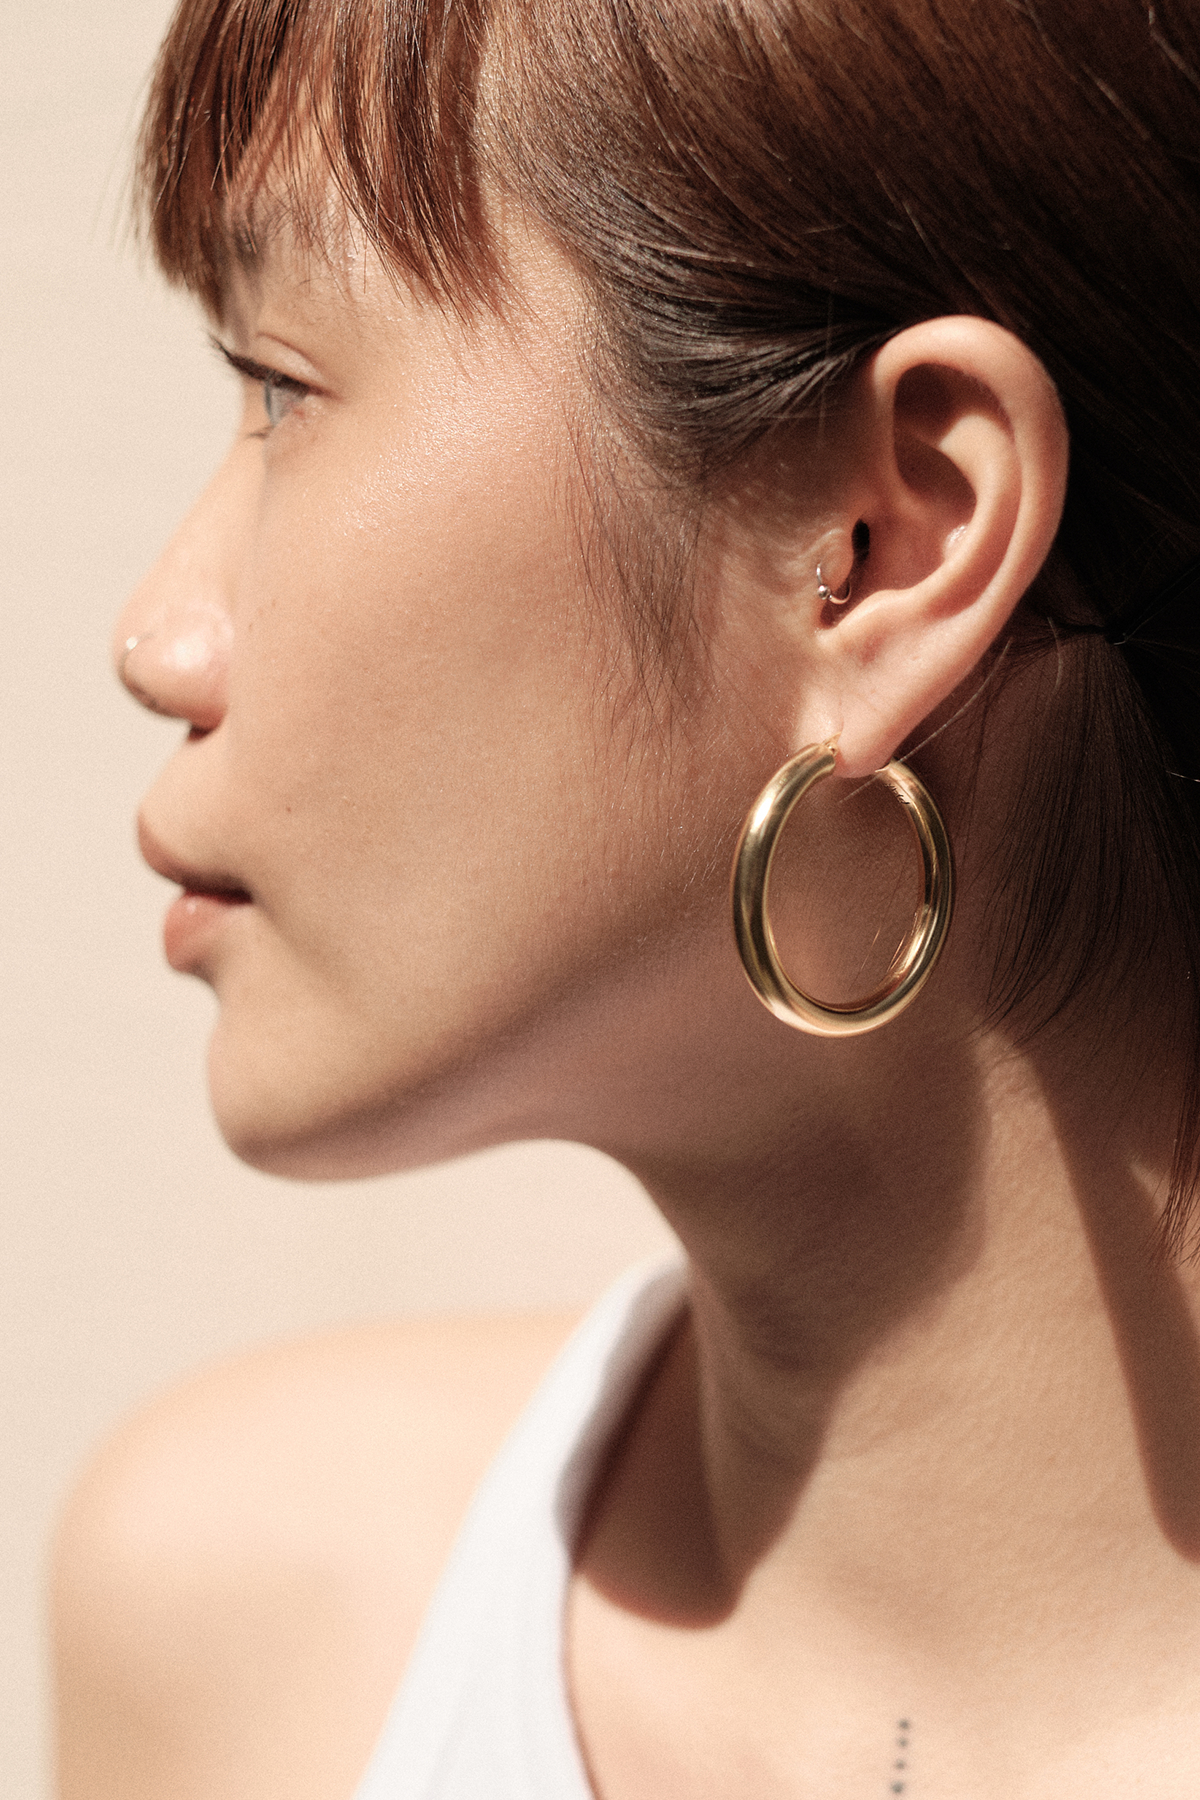 Pyar Jupiter Gold Hinged Hoop Earrings, available on ZERRIN with free shipping in Singapore